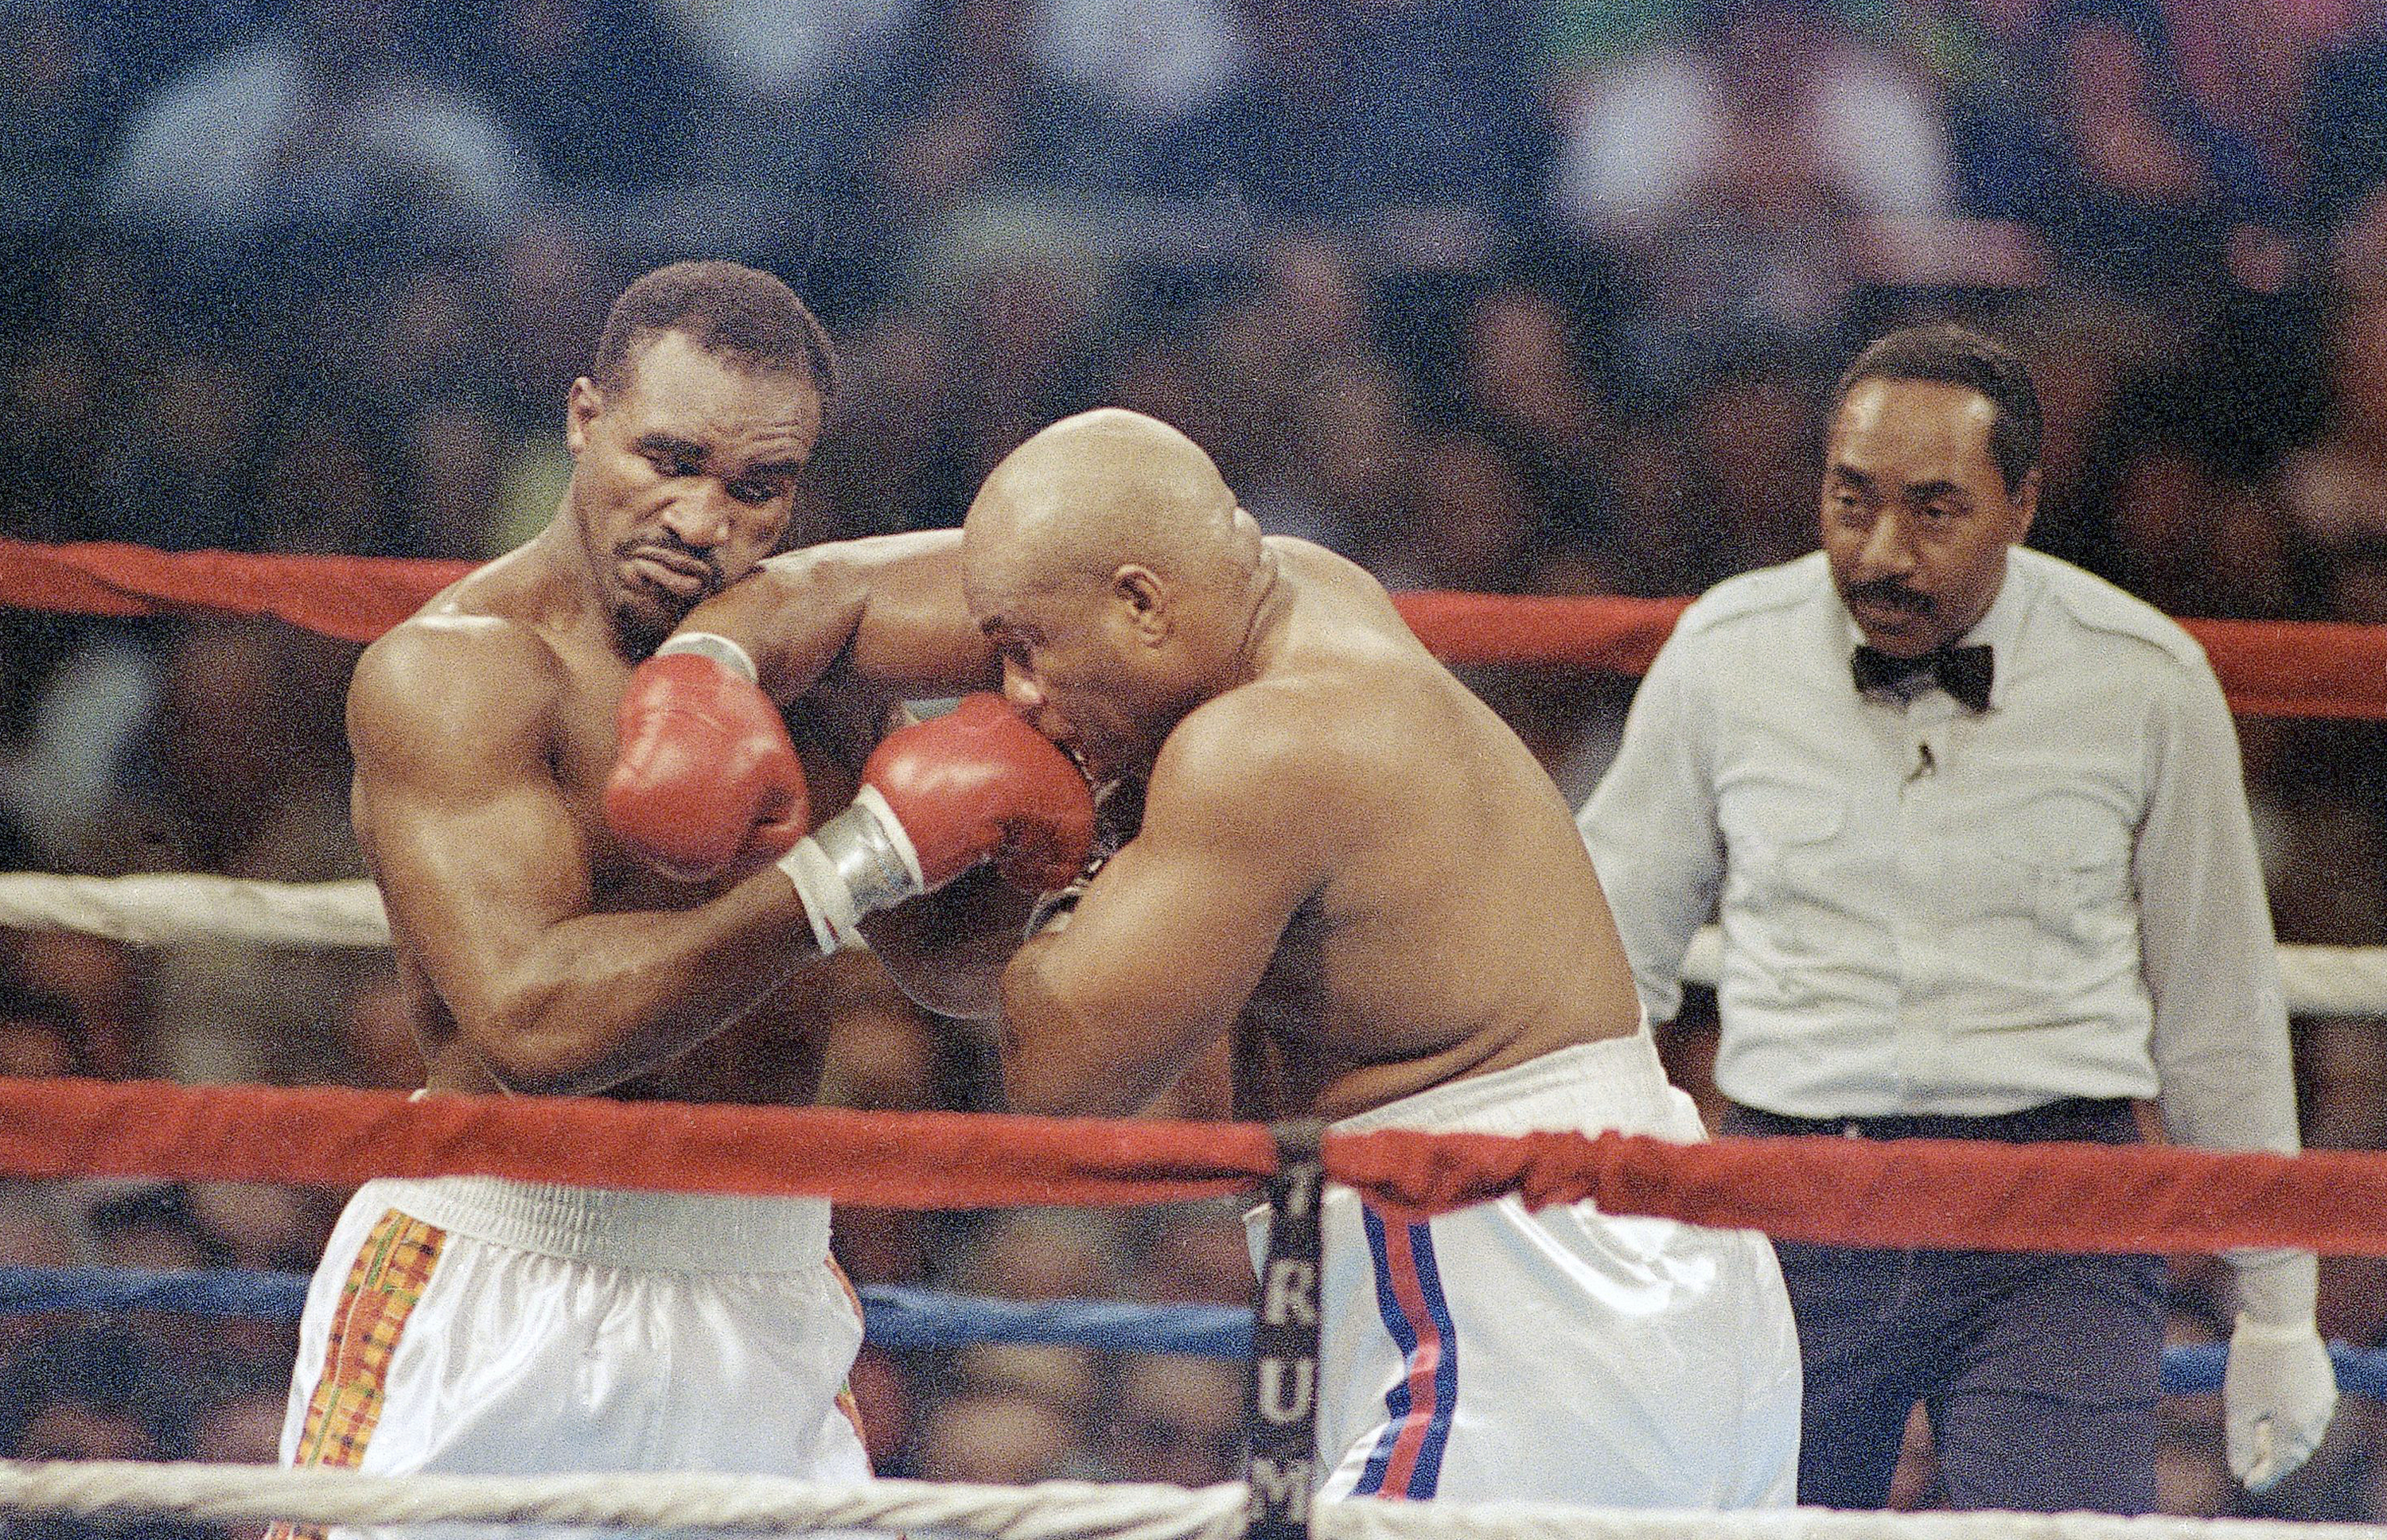 Bernard Hopkins Hall of Fame career started with a prison visit from Rudy Battle